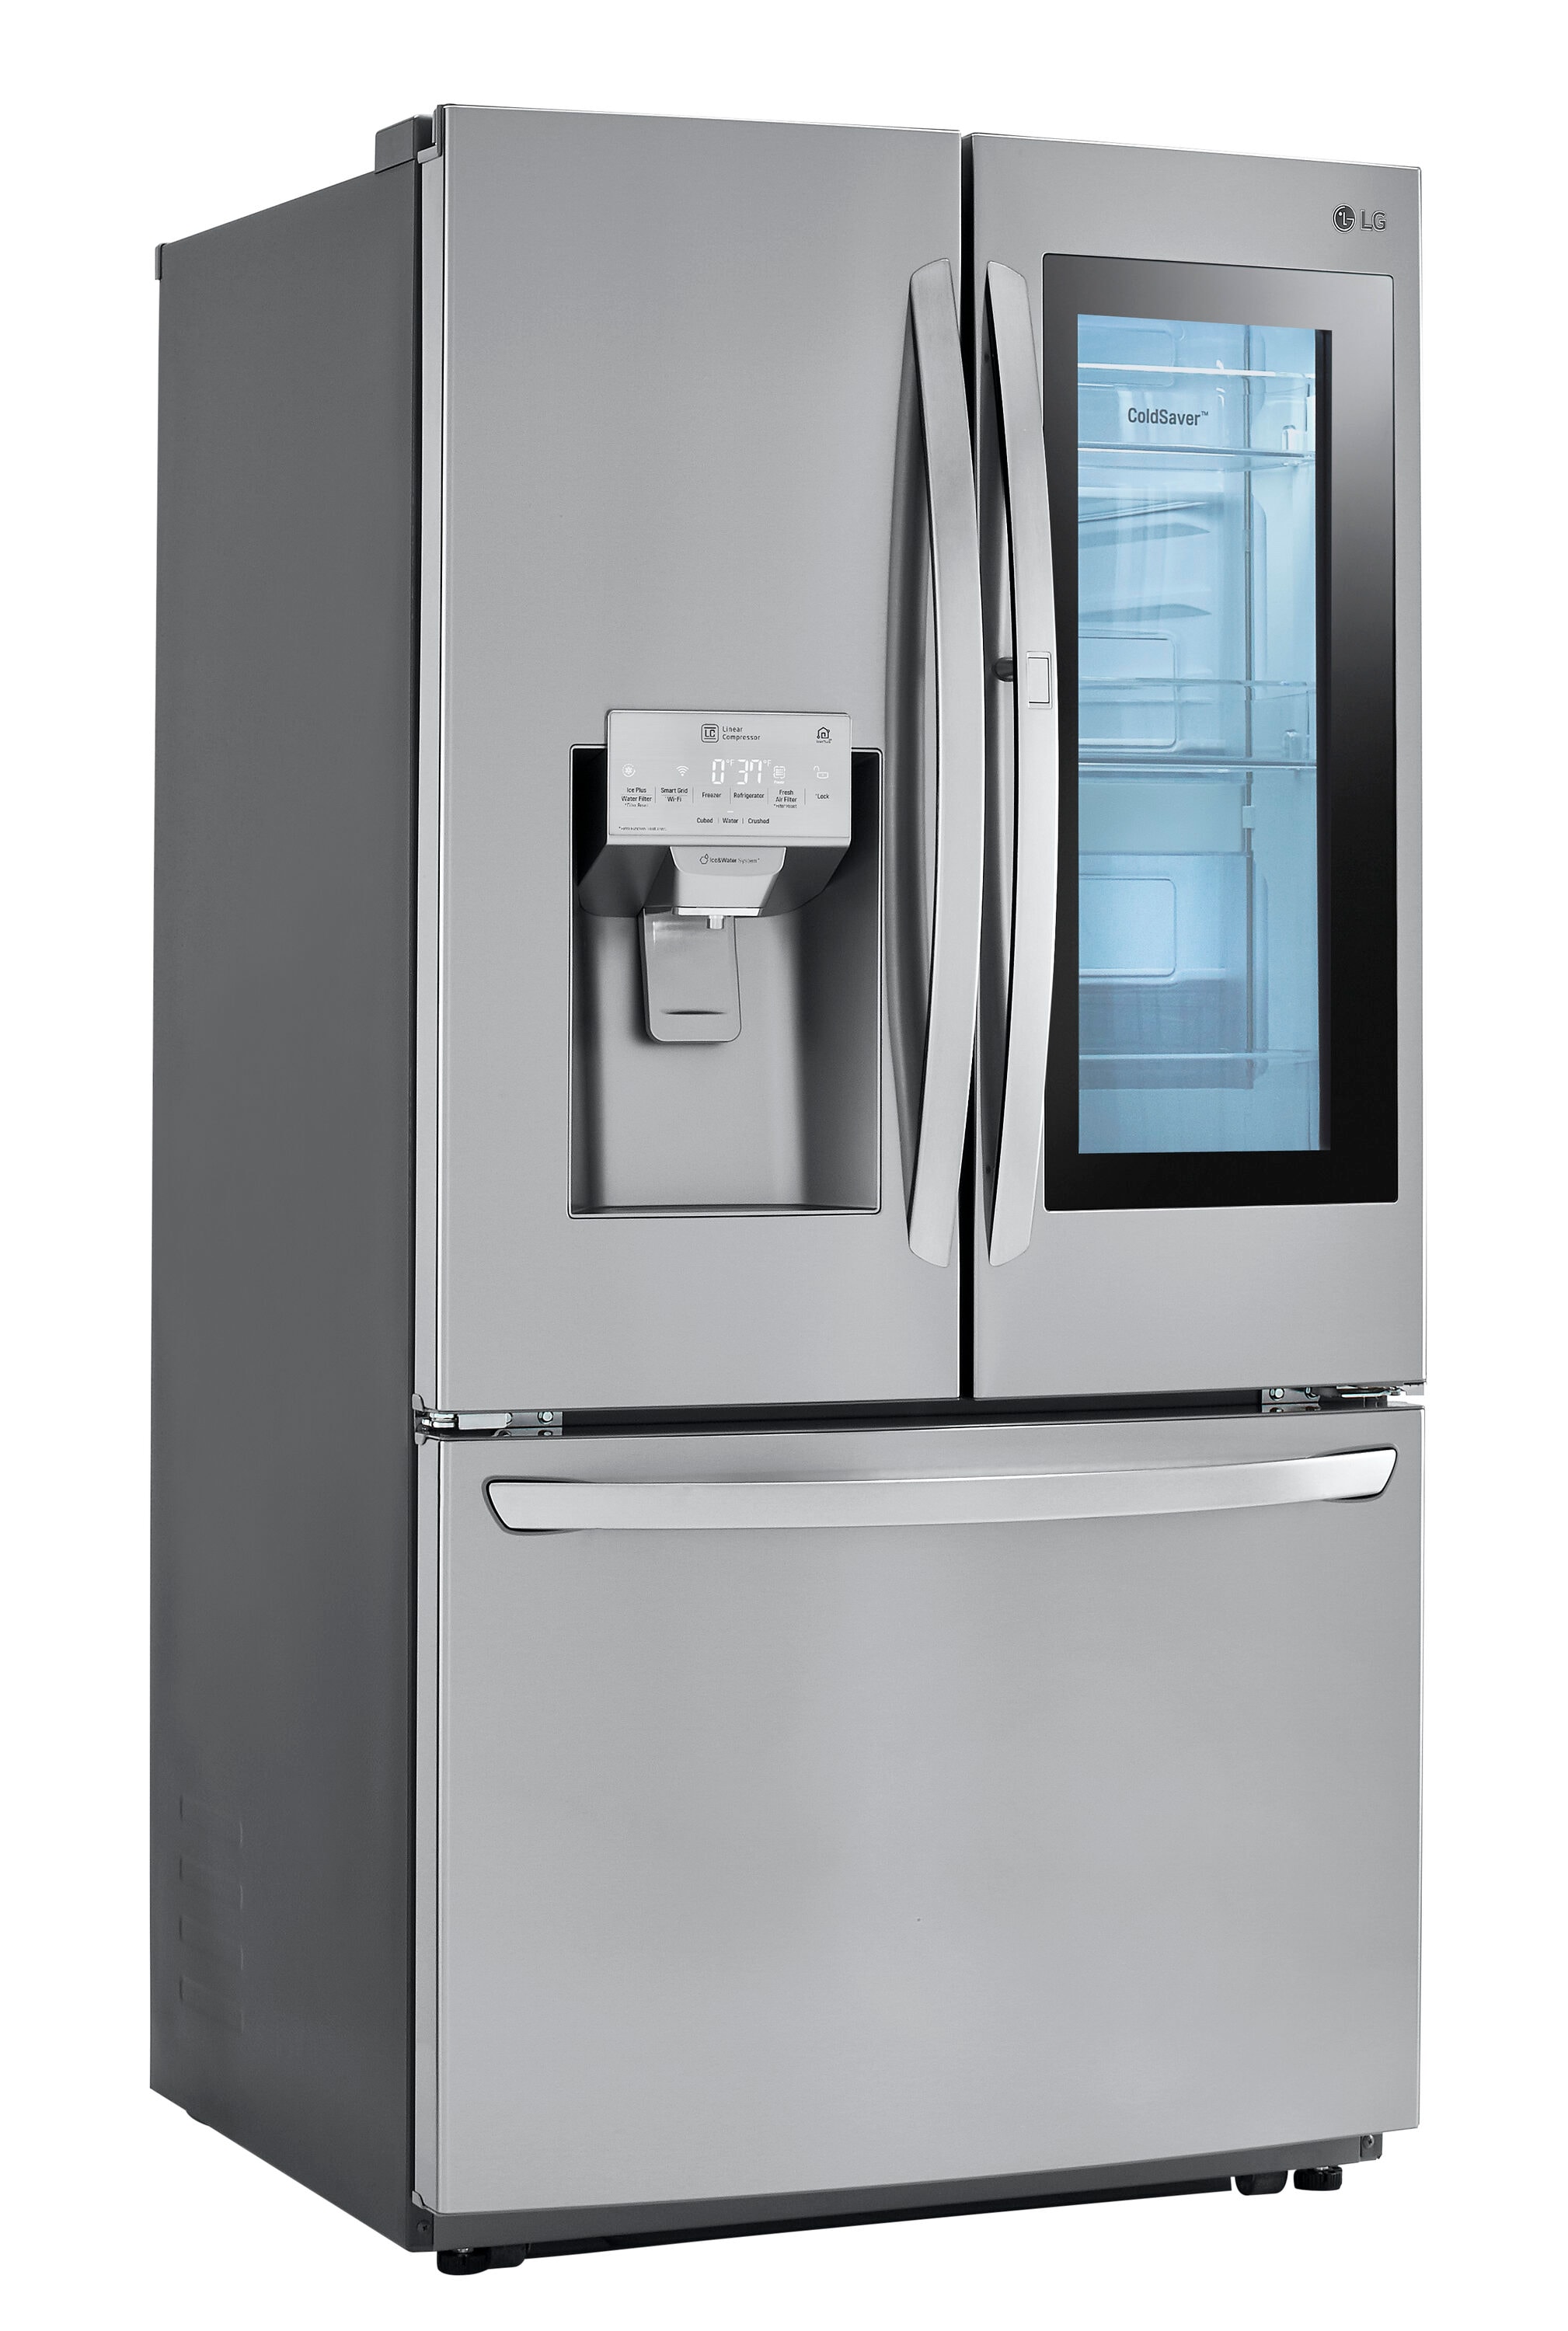 LG's new killer fridge feature: Clear ice for cocktails - CNET